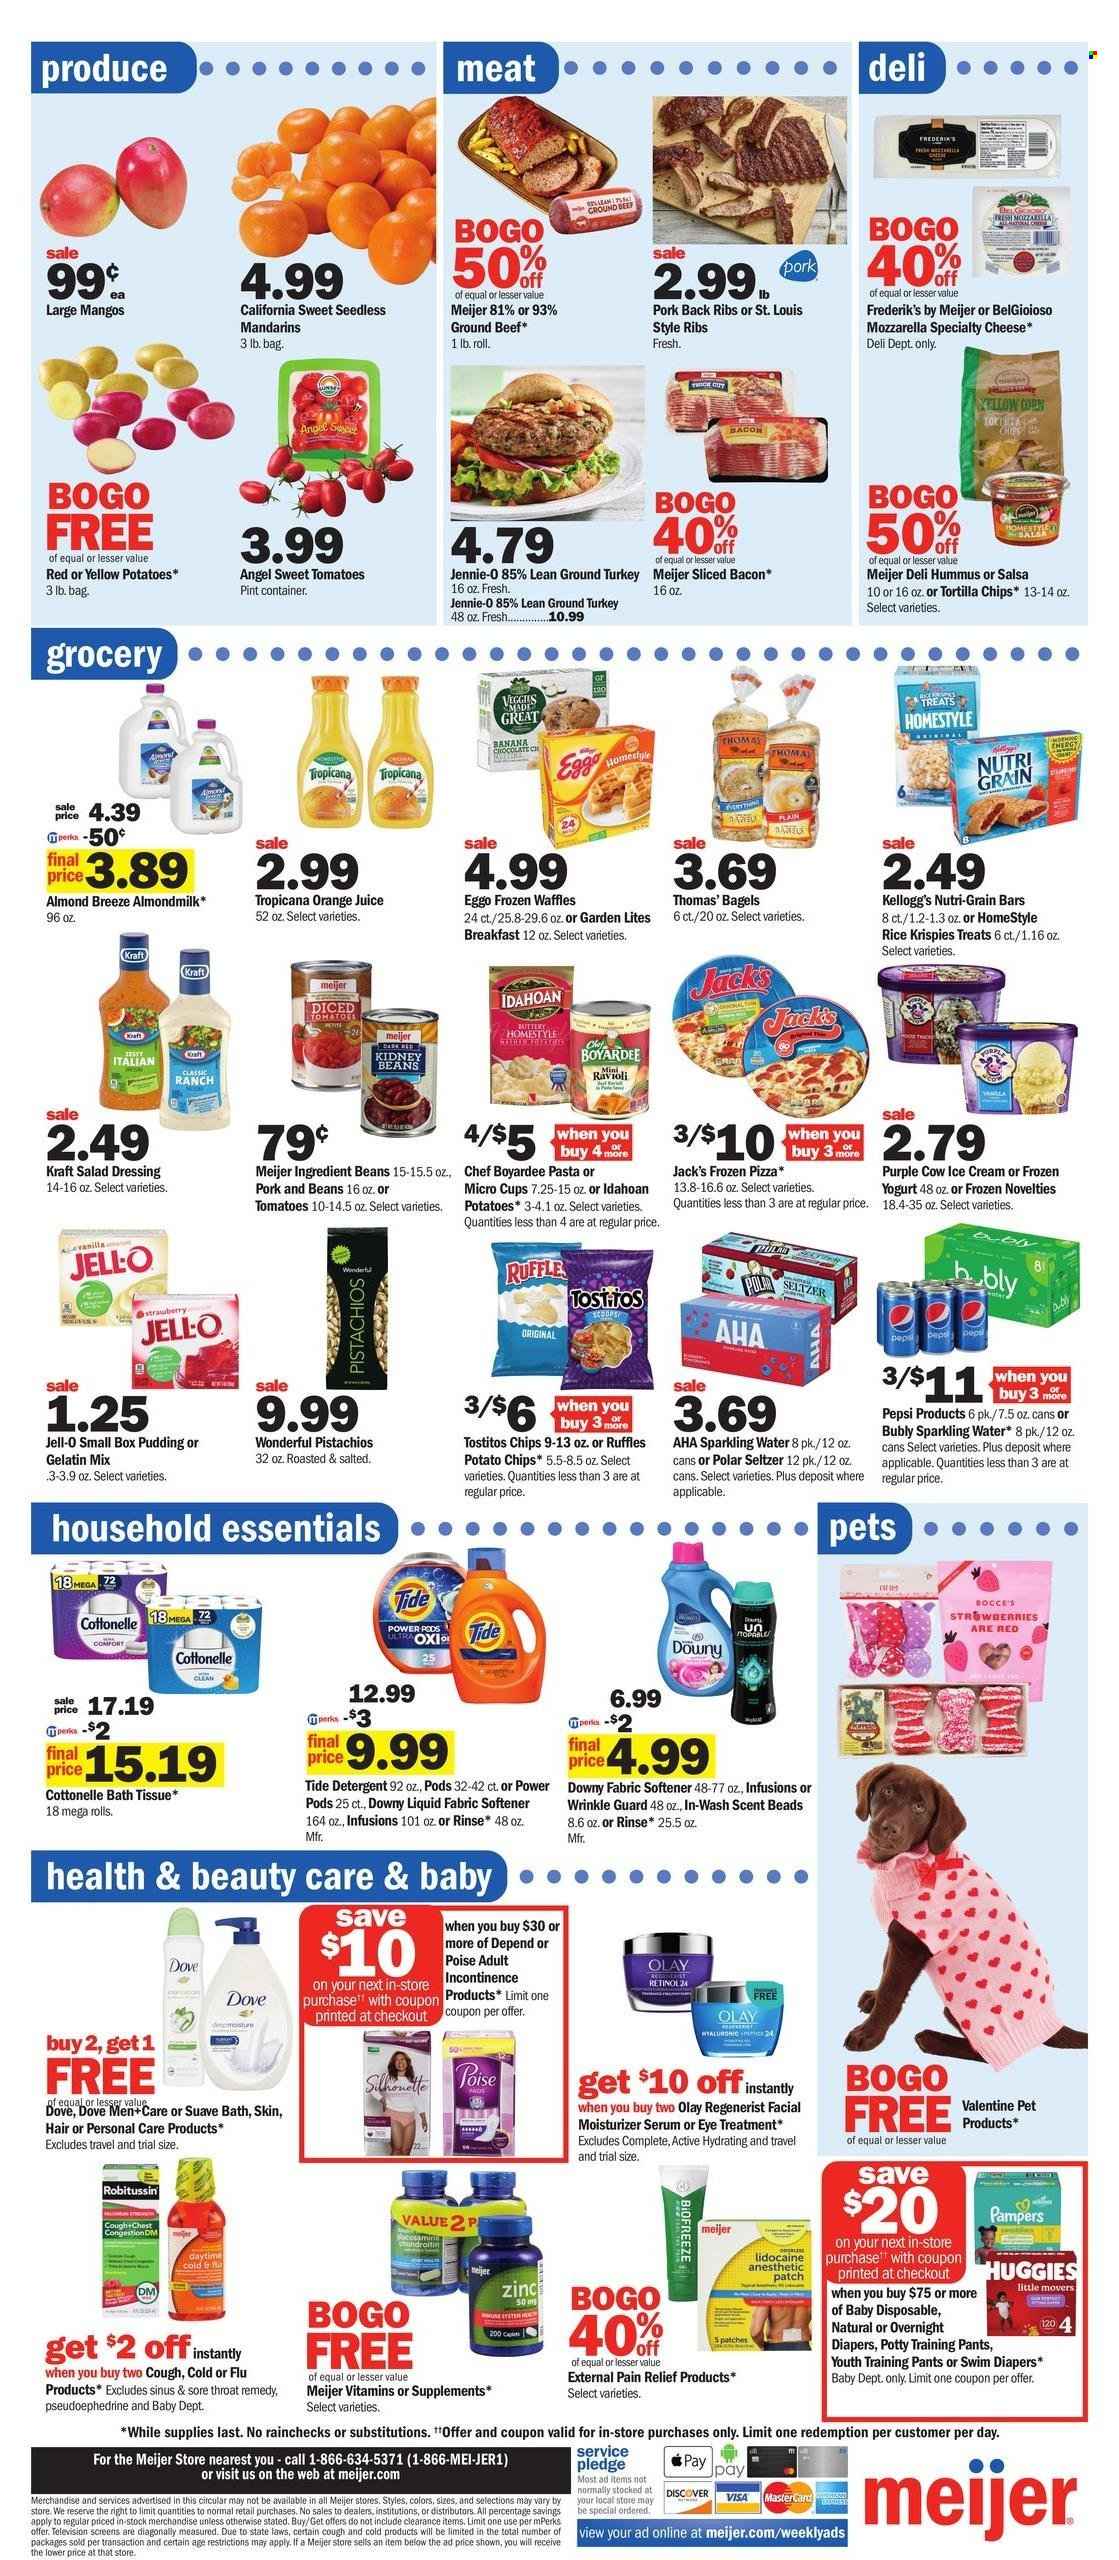 thumbnail - Meijer Flyer - 01/29/2023 - 02/04/2023 - Sales products - bagels, waffles, beans, mandarines, mango, ravioli, pizza, Kraft®, bacon, hummus, pudding, yoghurt, almond milk, Almond Breeze, ice cream, Dove, Kellogg's, tortilla chips, potato chips, Ruffles, Tostitos, Jell-O, Chef Boyardee, Rice Krispies, Nutri-Grain, salad dressing, dressing, salsa, pistachios, Pepsi, orange juice, juice, seltzer water, sparkling water, ground turkey, beef meat, ground beef, ribs, pork meat, pork ribs, pork back ribs, Huggies, Pampers, pants, nappies, baby pants, bath tissue, Cottonelle, detergent, Pledge, Tide, fabric softener, Downy Laundry, Suave, moisturizer, serum, Olay, cup, container, cap, Cold & Flu, Robitussin, pain relief, gelatin, zinc. Page 12.